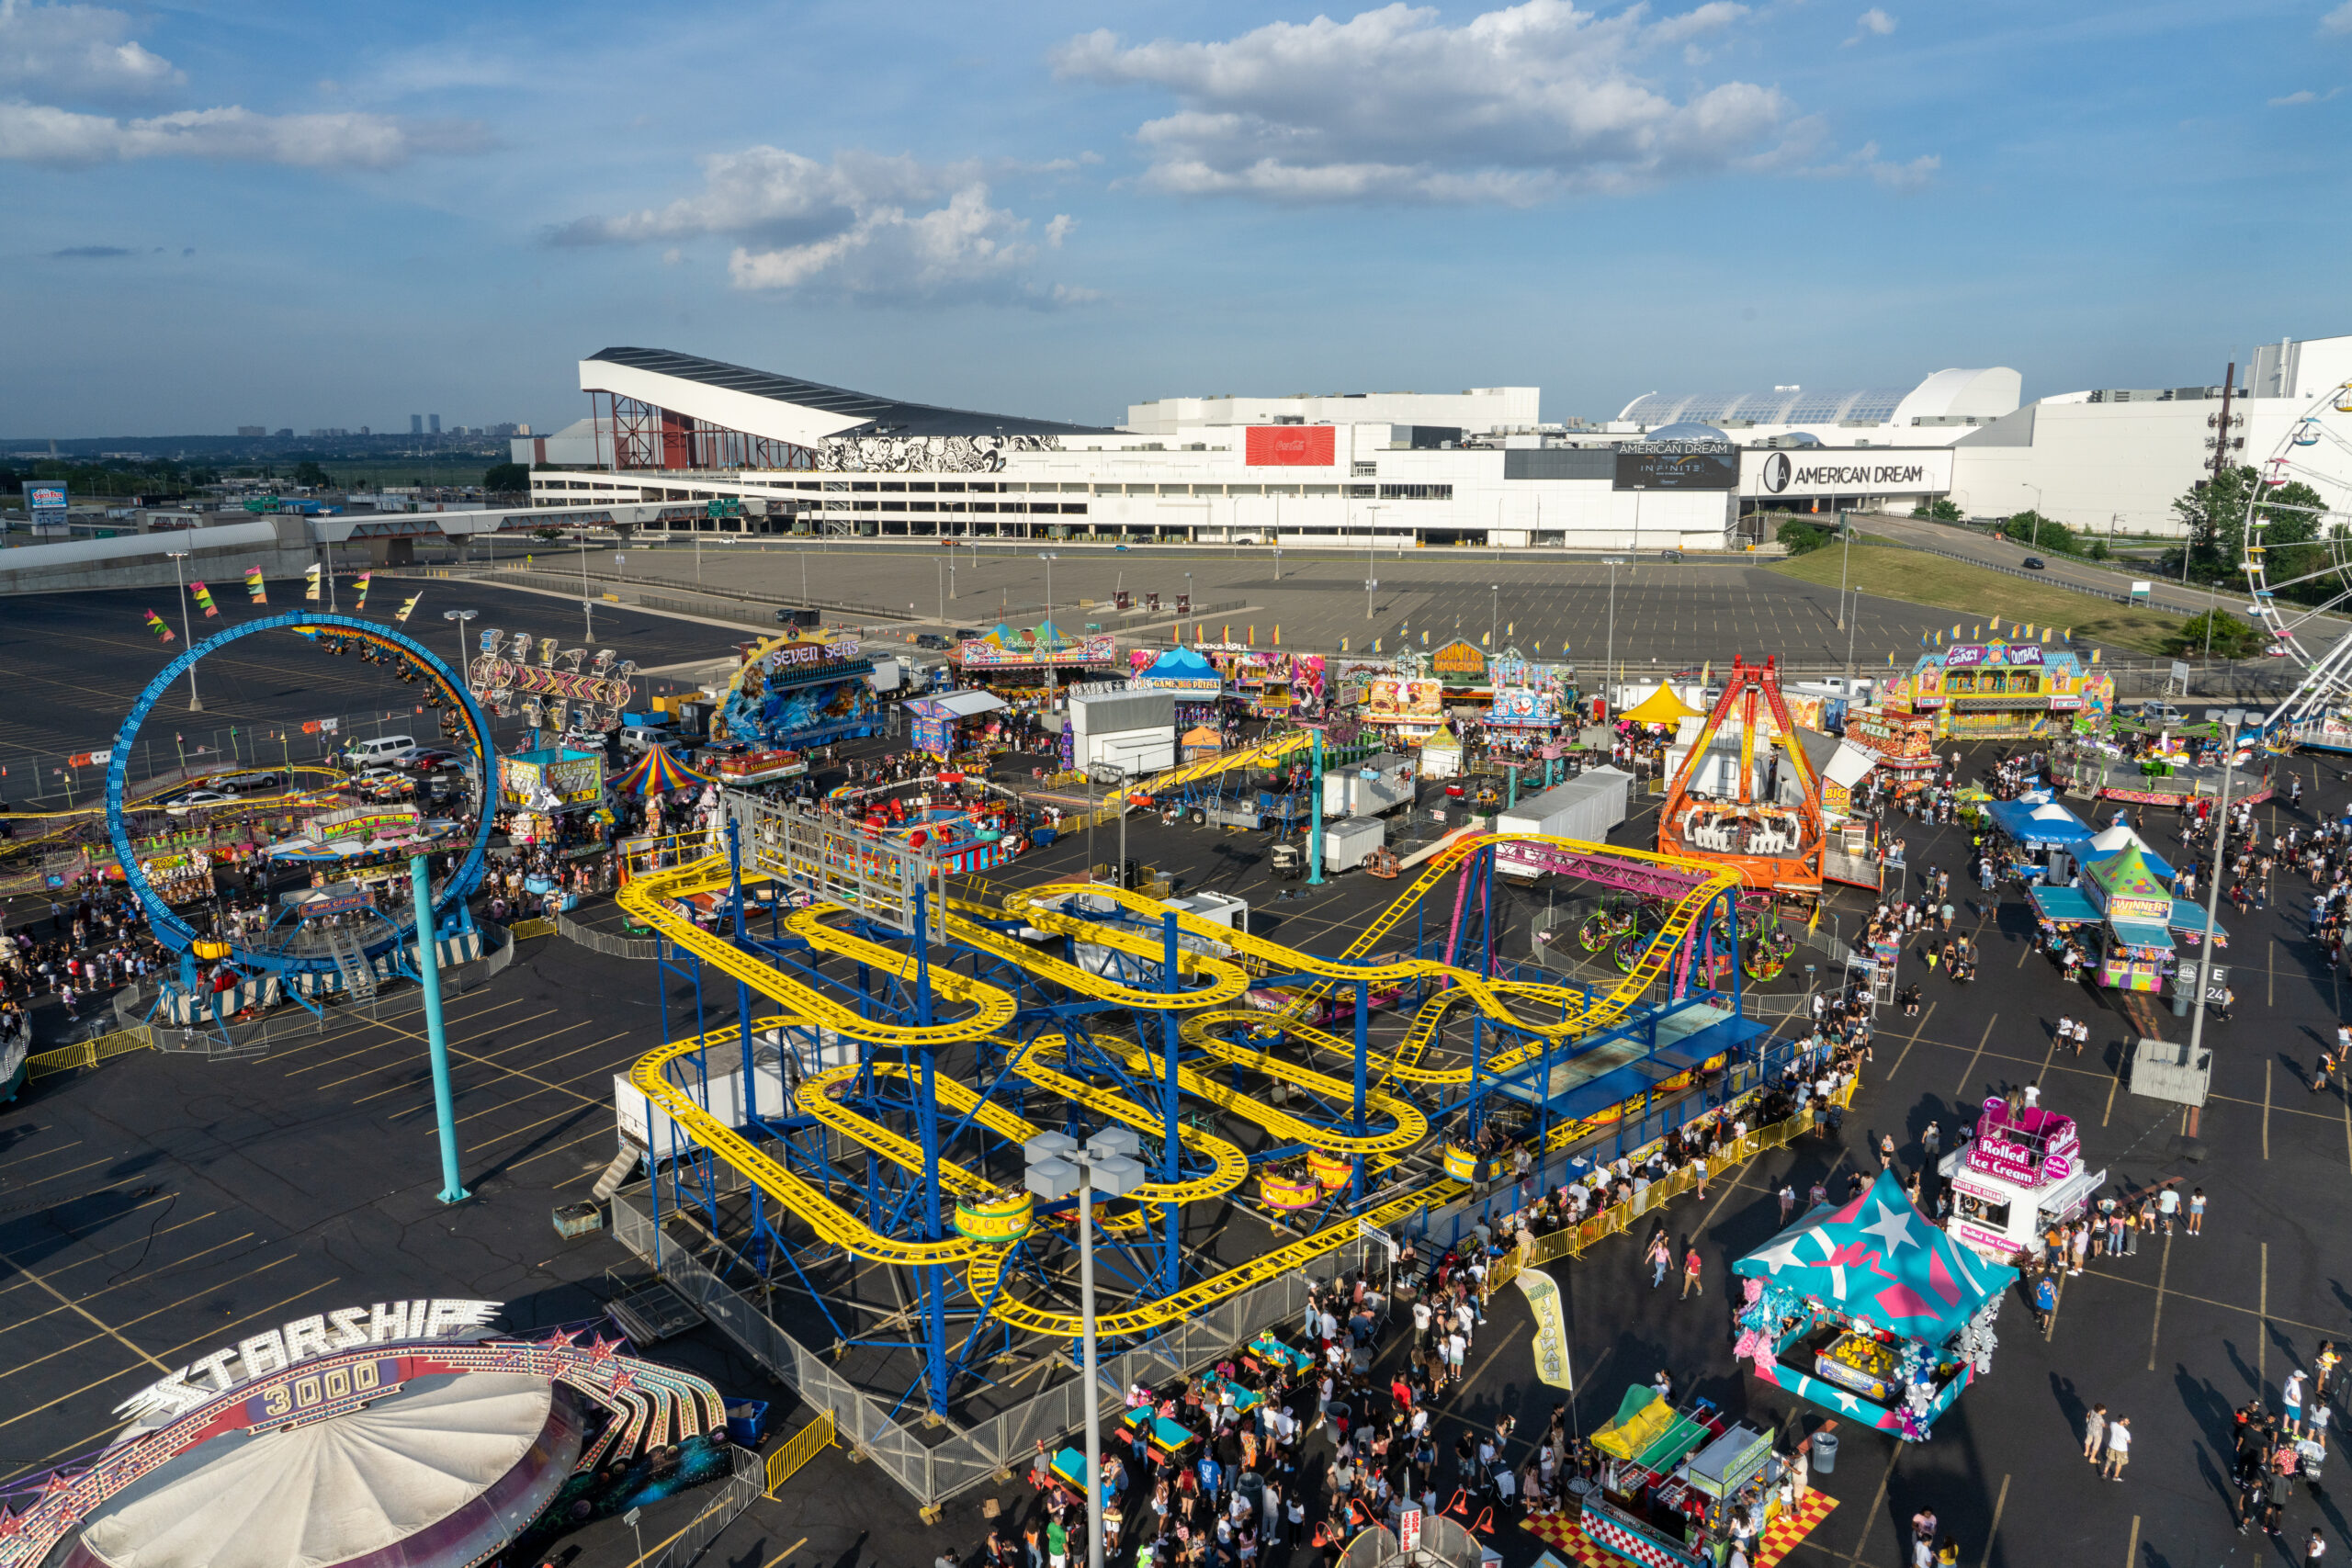 NJ State Fair at the Meadowlands - rides and activities